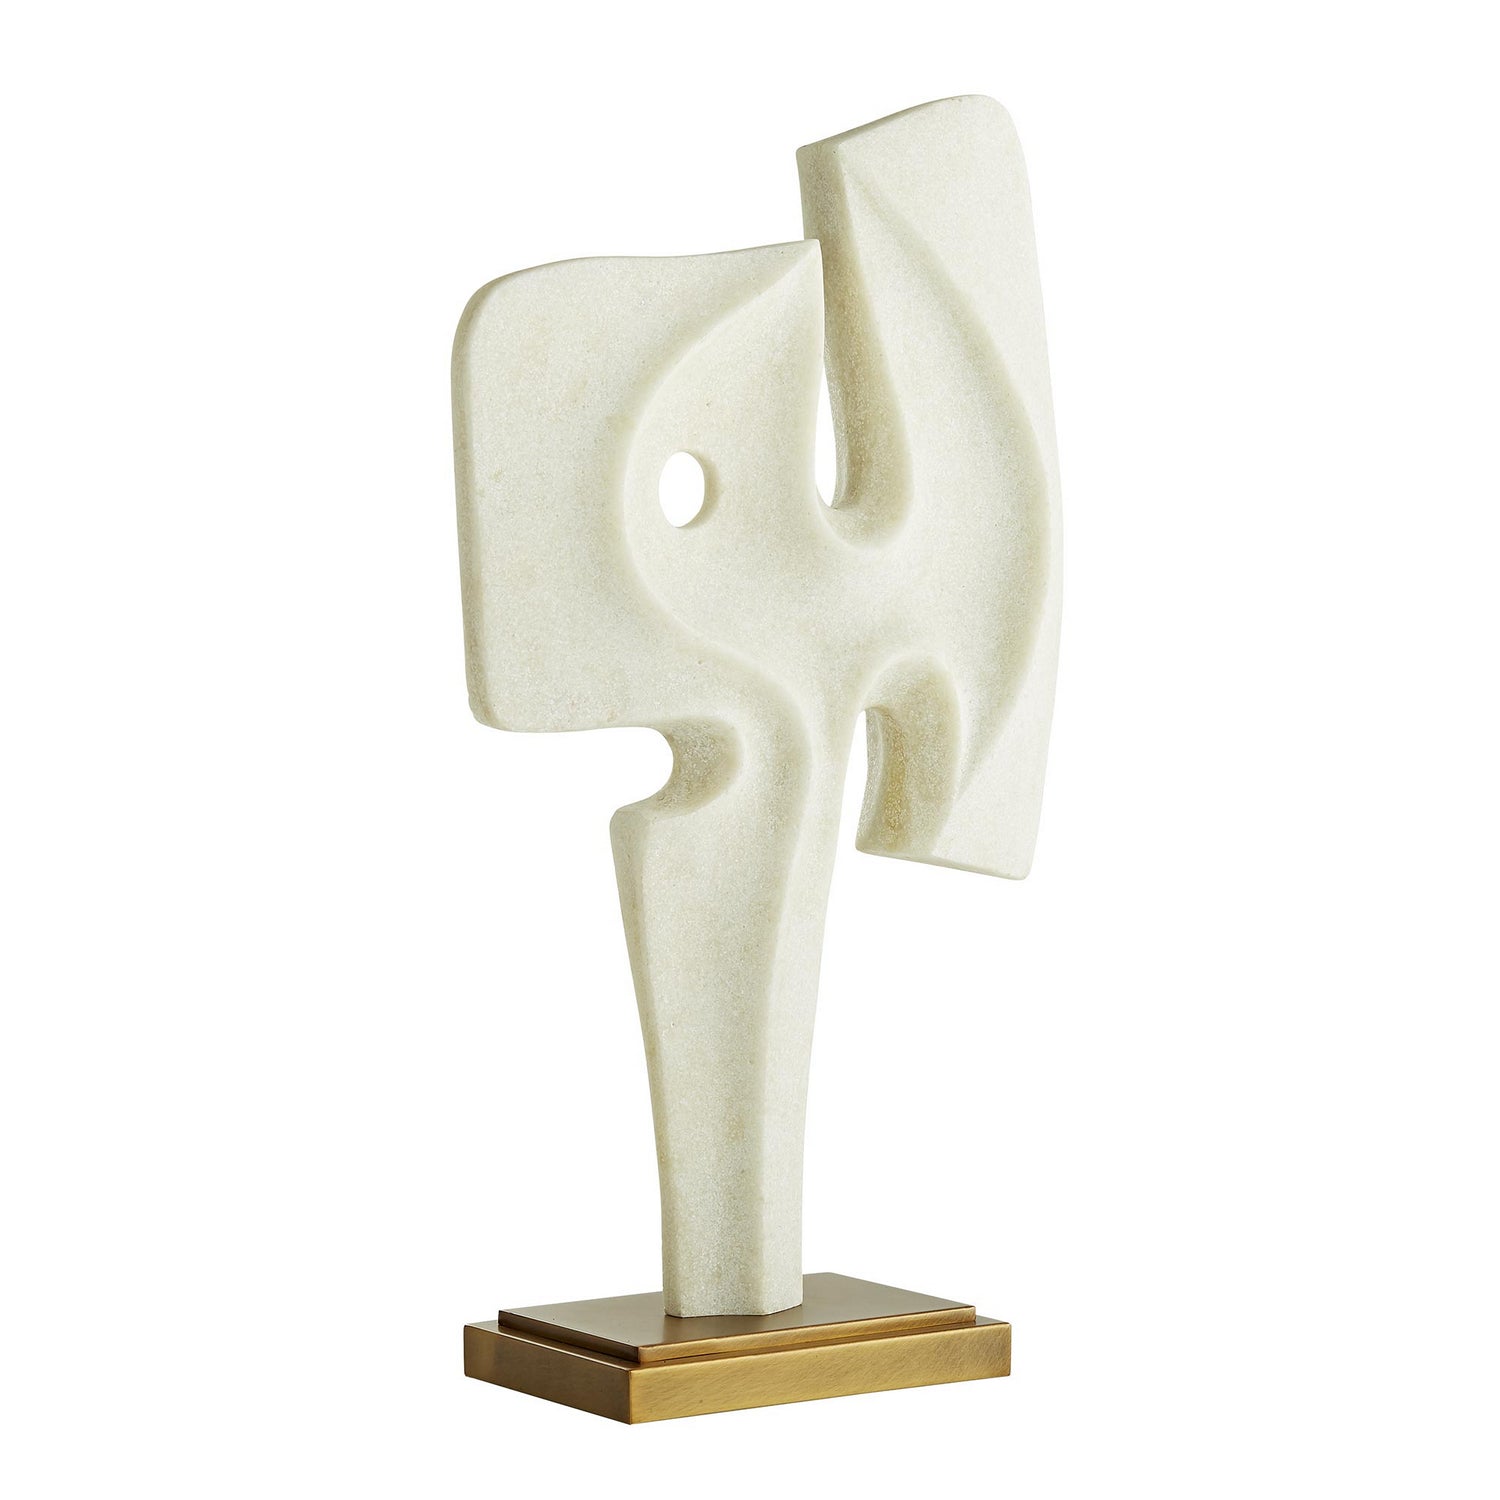 Sculpture from the Maeve collection in Faux Marble finish